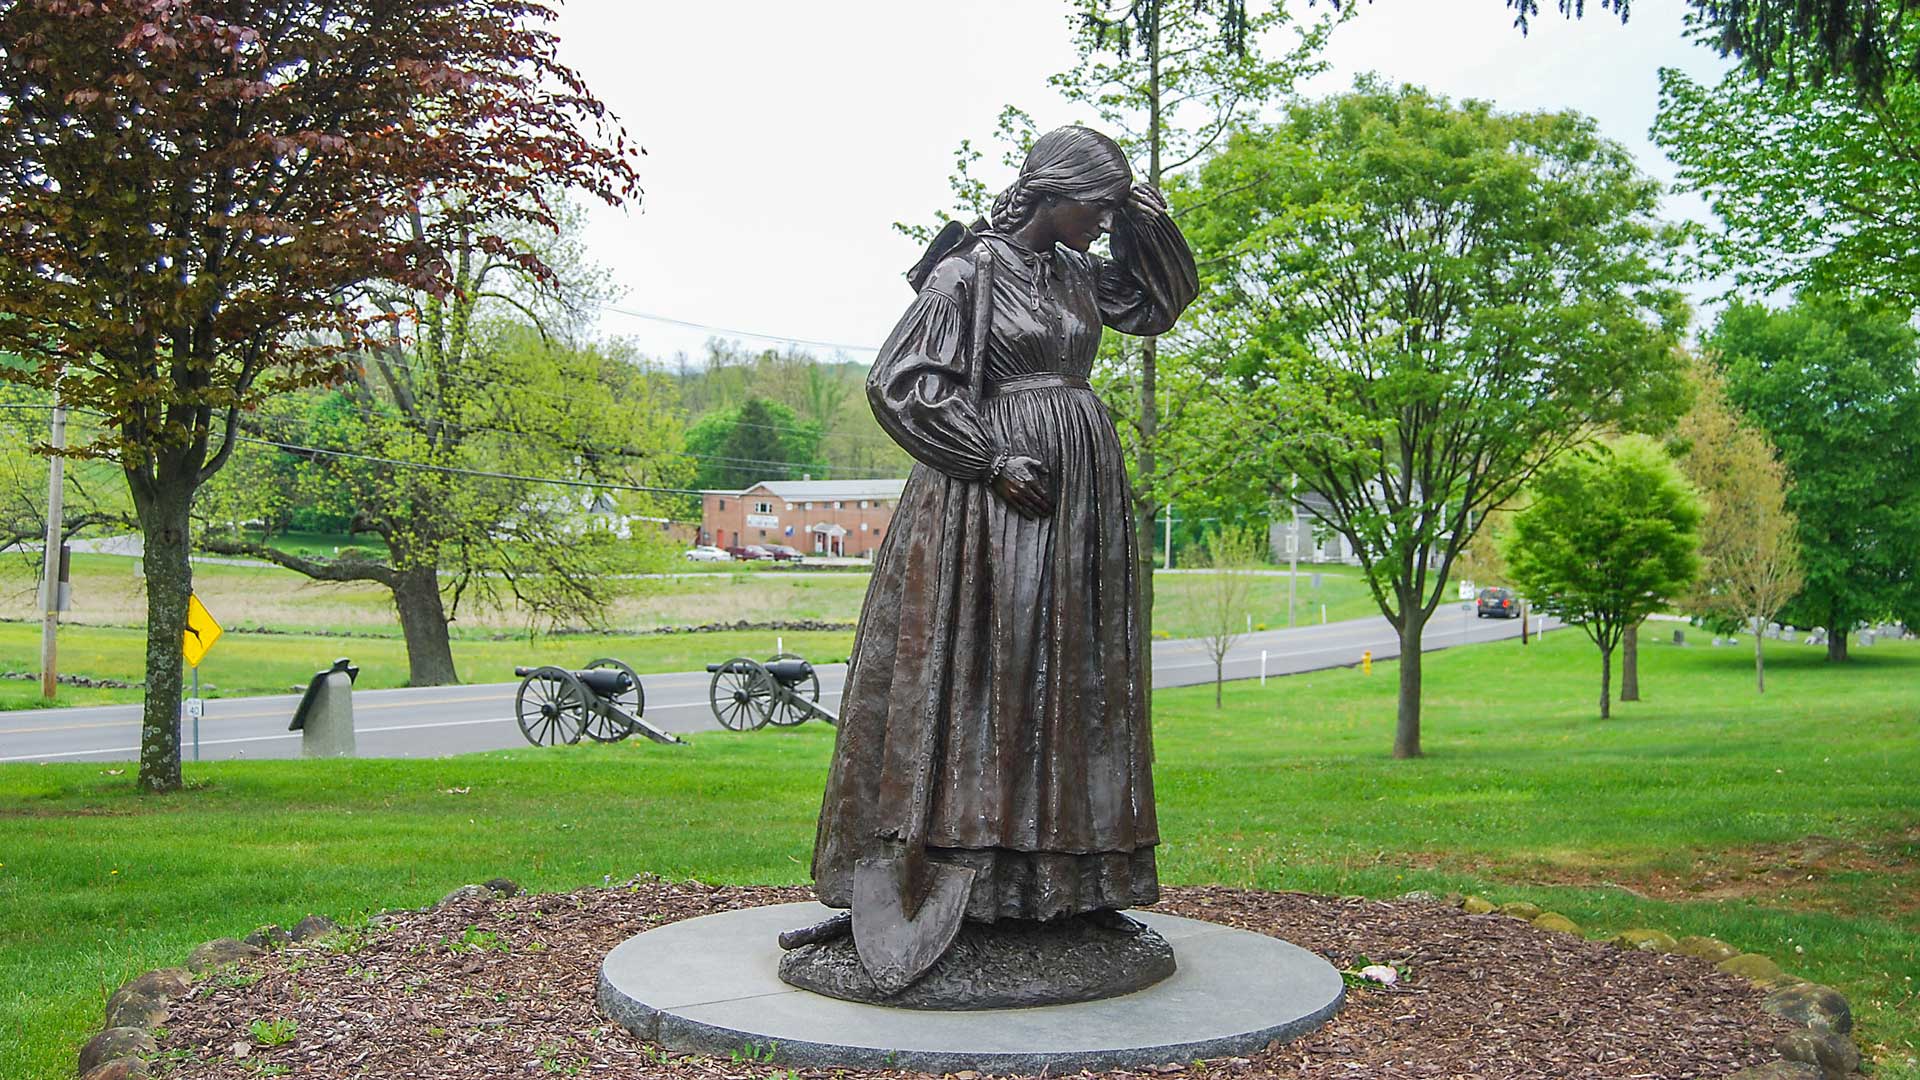 A statue of Elizabeth Masser Thorn at the Evergreen Cemetery Gatehouse. Elizabeth took over as caretaker of the cemetery when her husband, Peter Thorn, joined the Union Army. When the war spilled into Gettysburg, Elizabeth, who was six months pregnant at the time, and her elderly father dug graves for fallen soldiers in the weeks following the battle. (Stephanie Ritenbaugh/Post-Gazette)